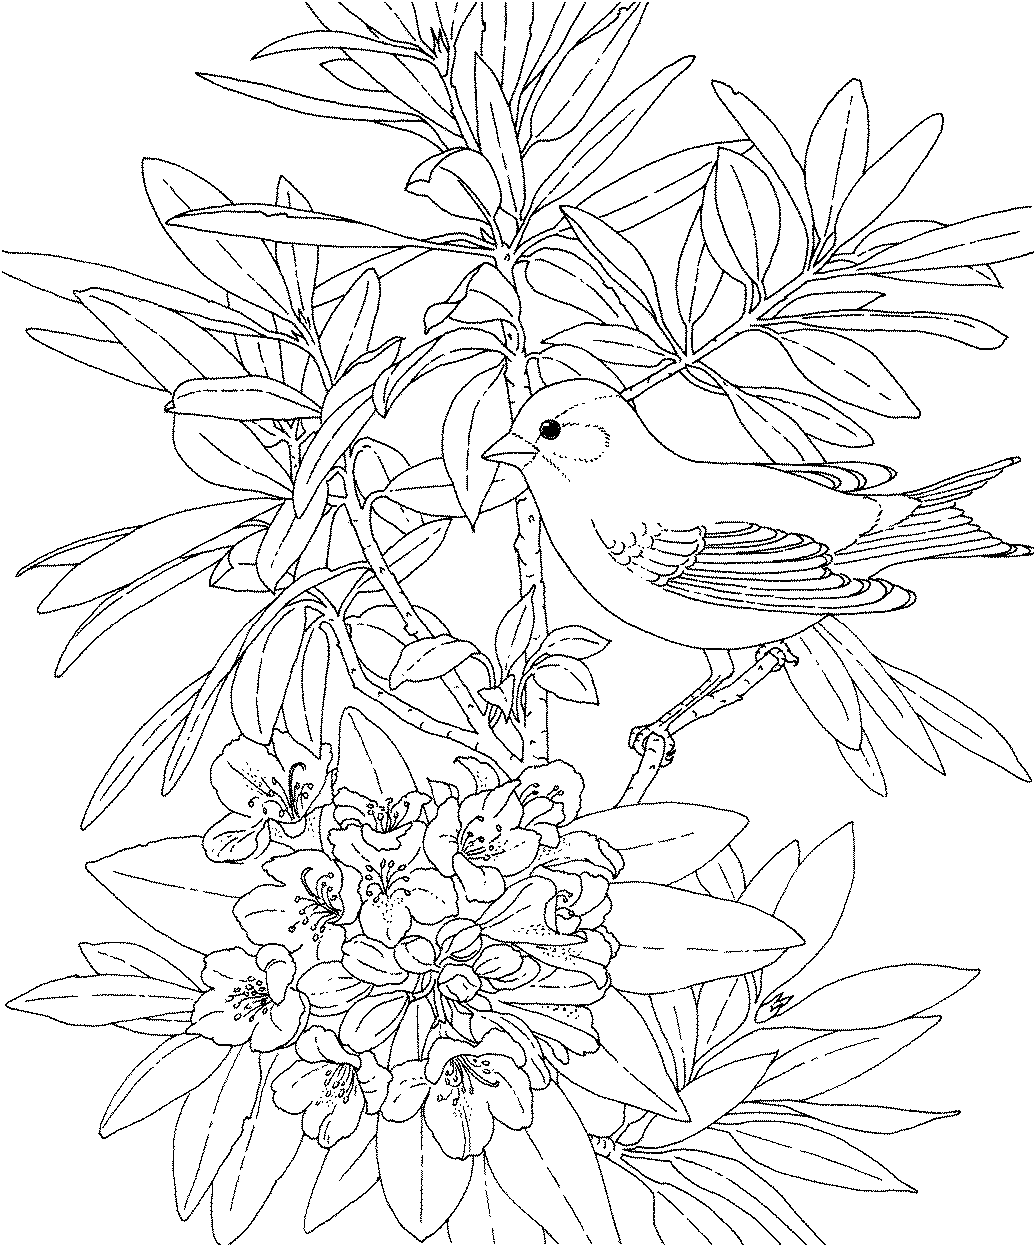 free bird coloring pages his heart of compassion little winter birds pages coloring free bird 